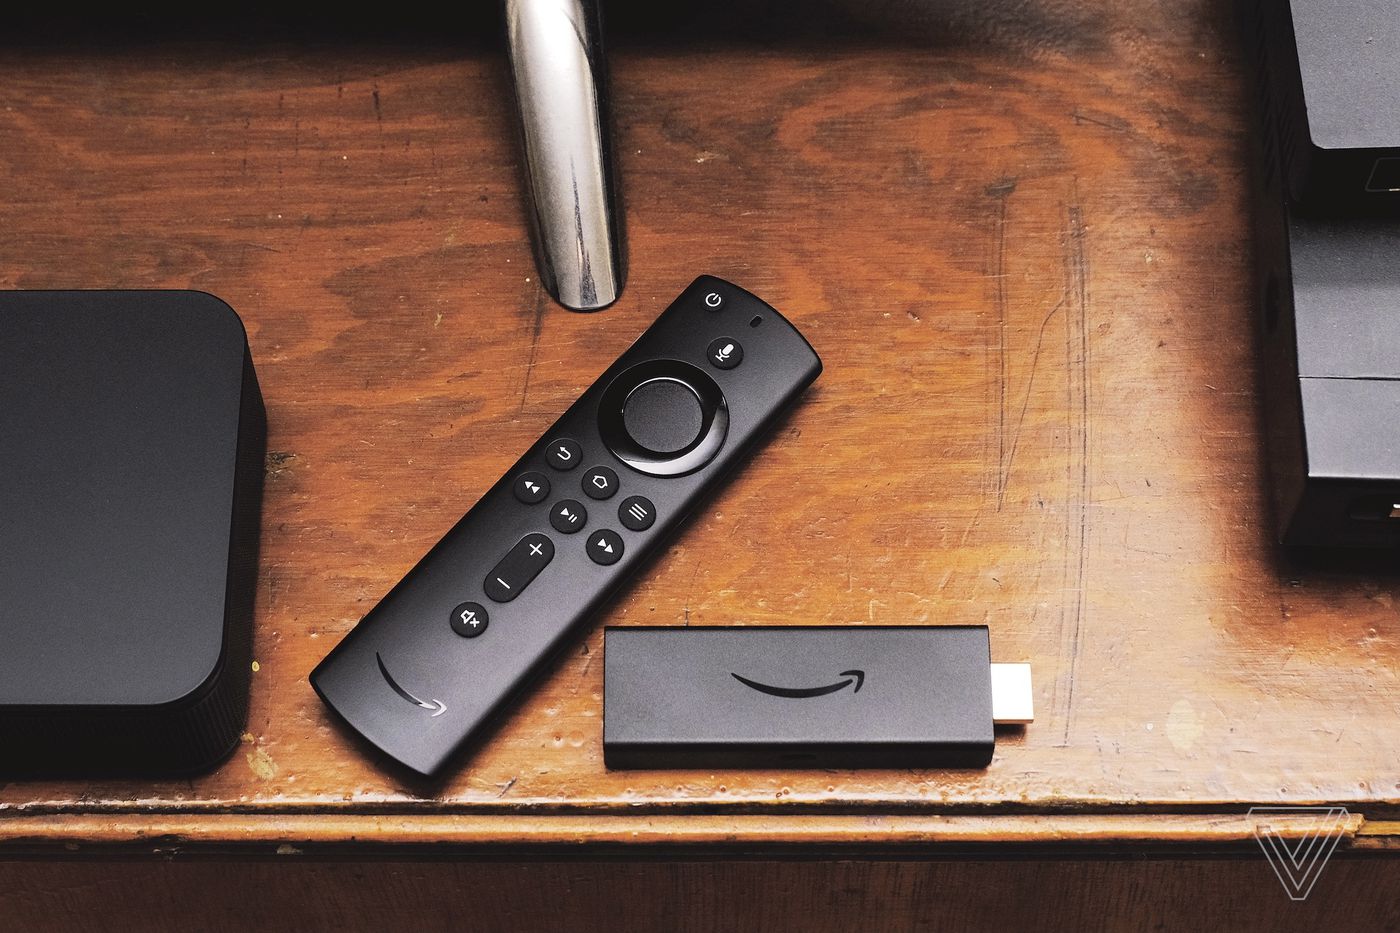 Amazon Fire TV Stick 4K and the Fire TV Cube